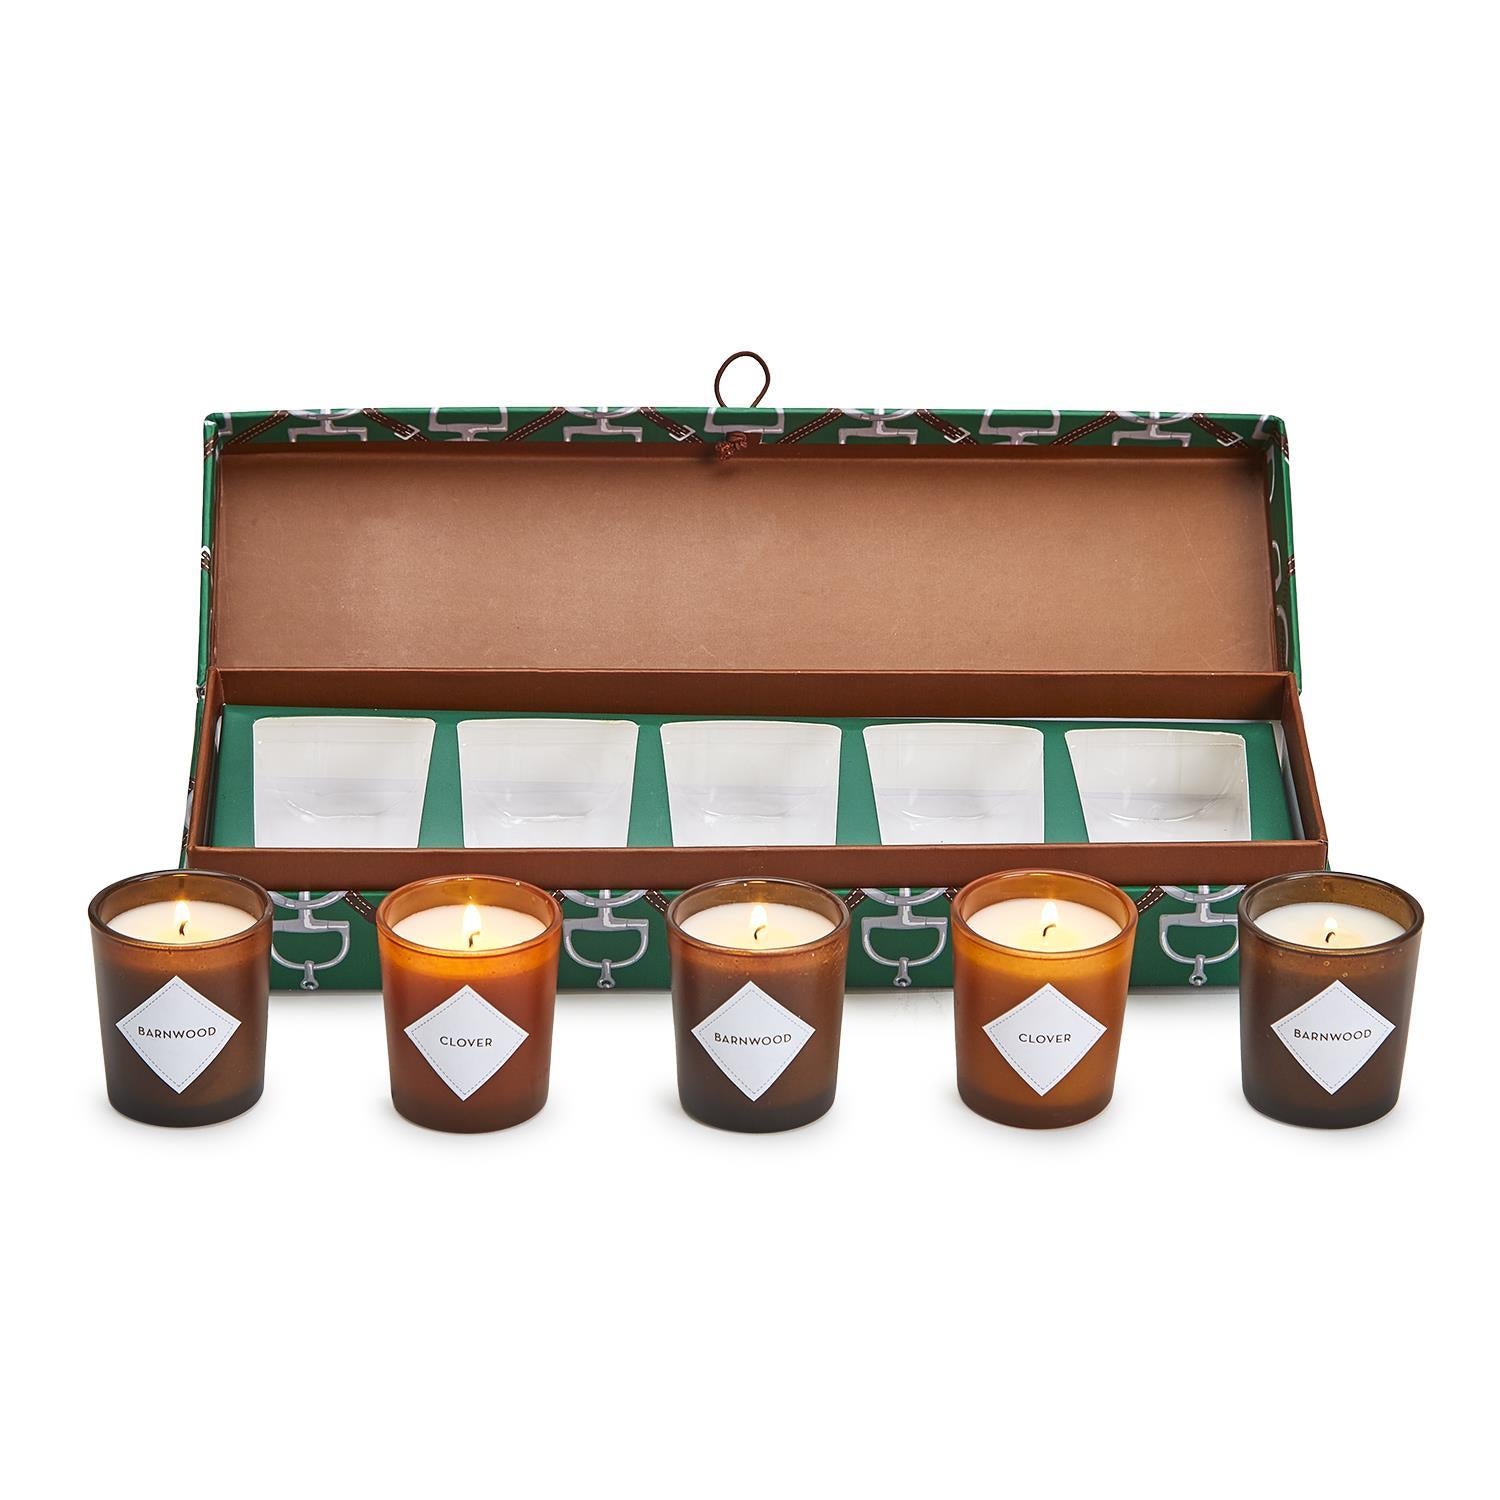 Two's Co. 5 Candle Set in Gift Box